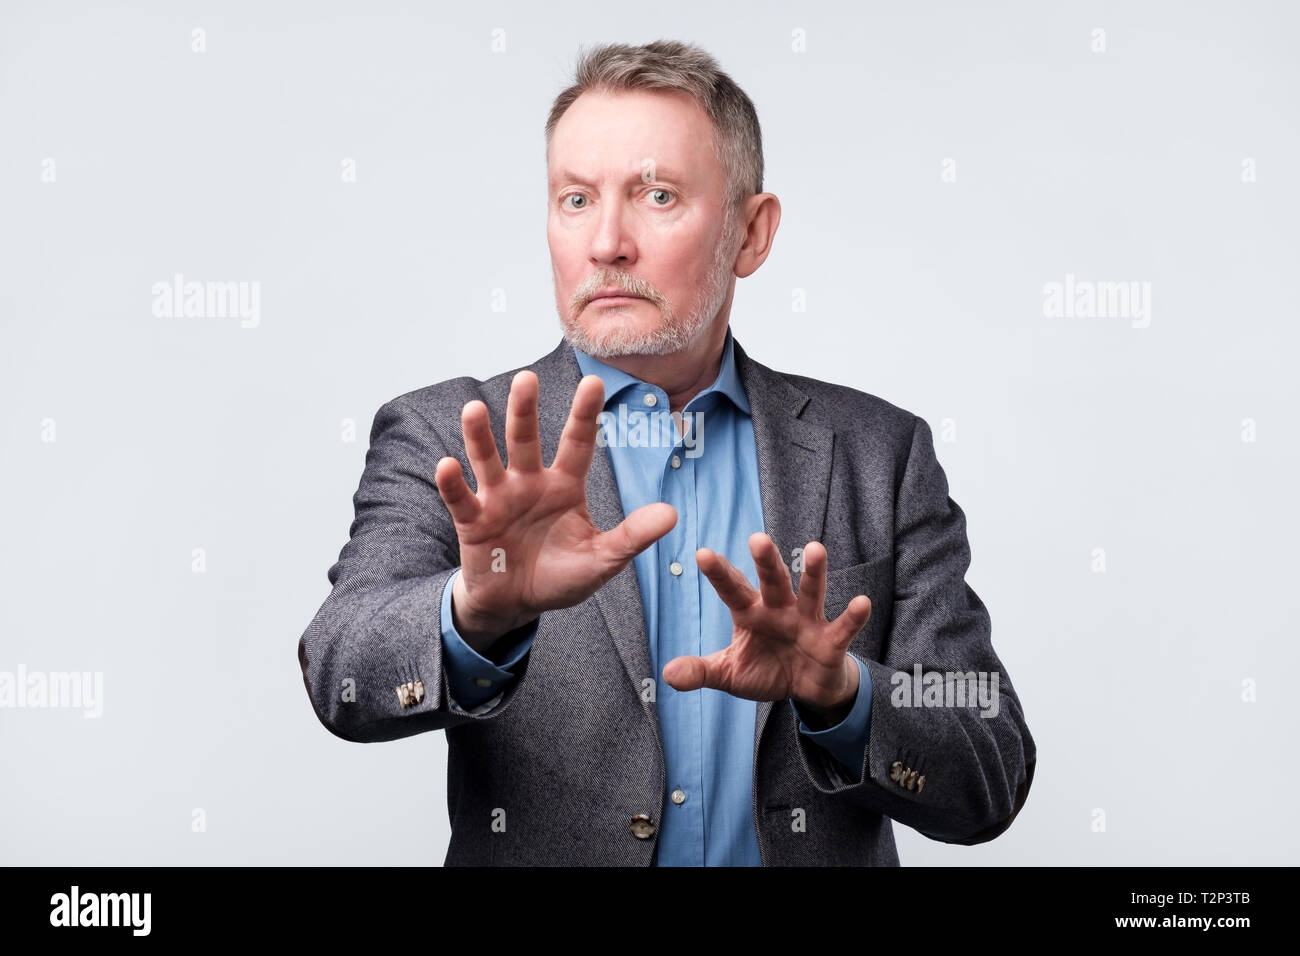 Mature european man in suit showing refusal gesture. It is not for me, leave me in piece, has angry expression. Studio shoot Stock Photo